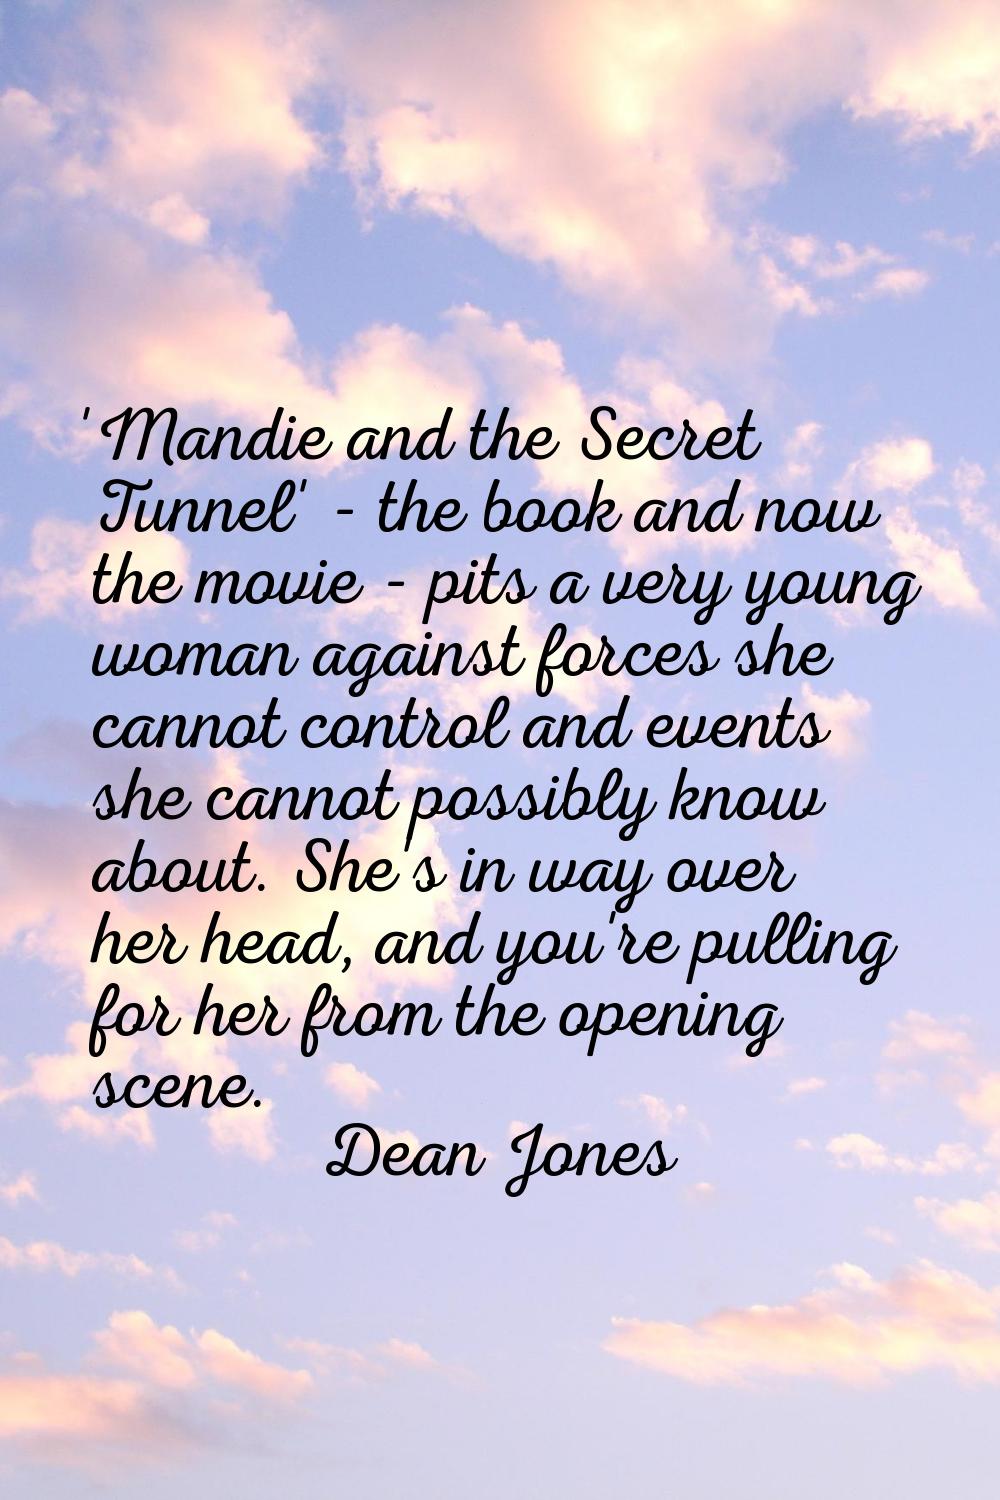 'Mandie and the Secret Tunnel' - the book and now the movie - pits a very young woman against force